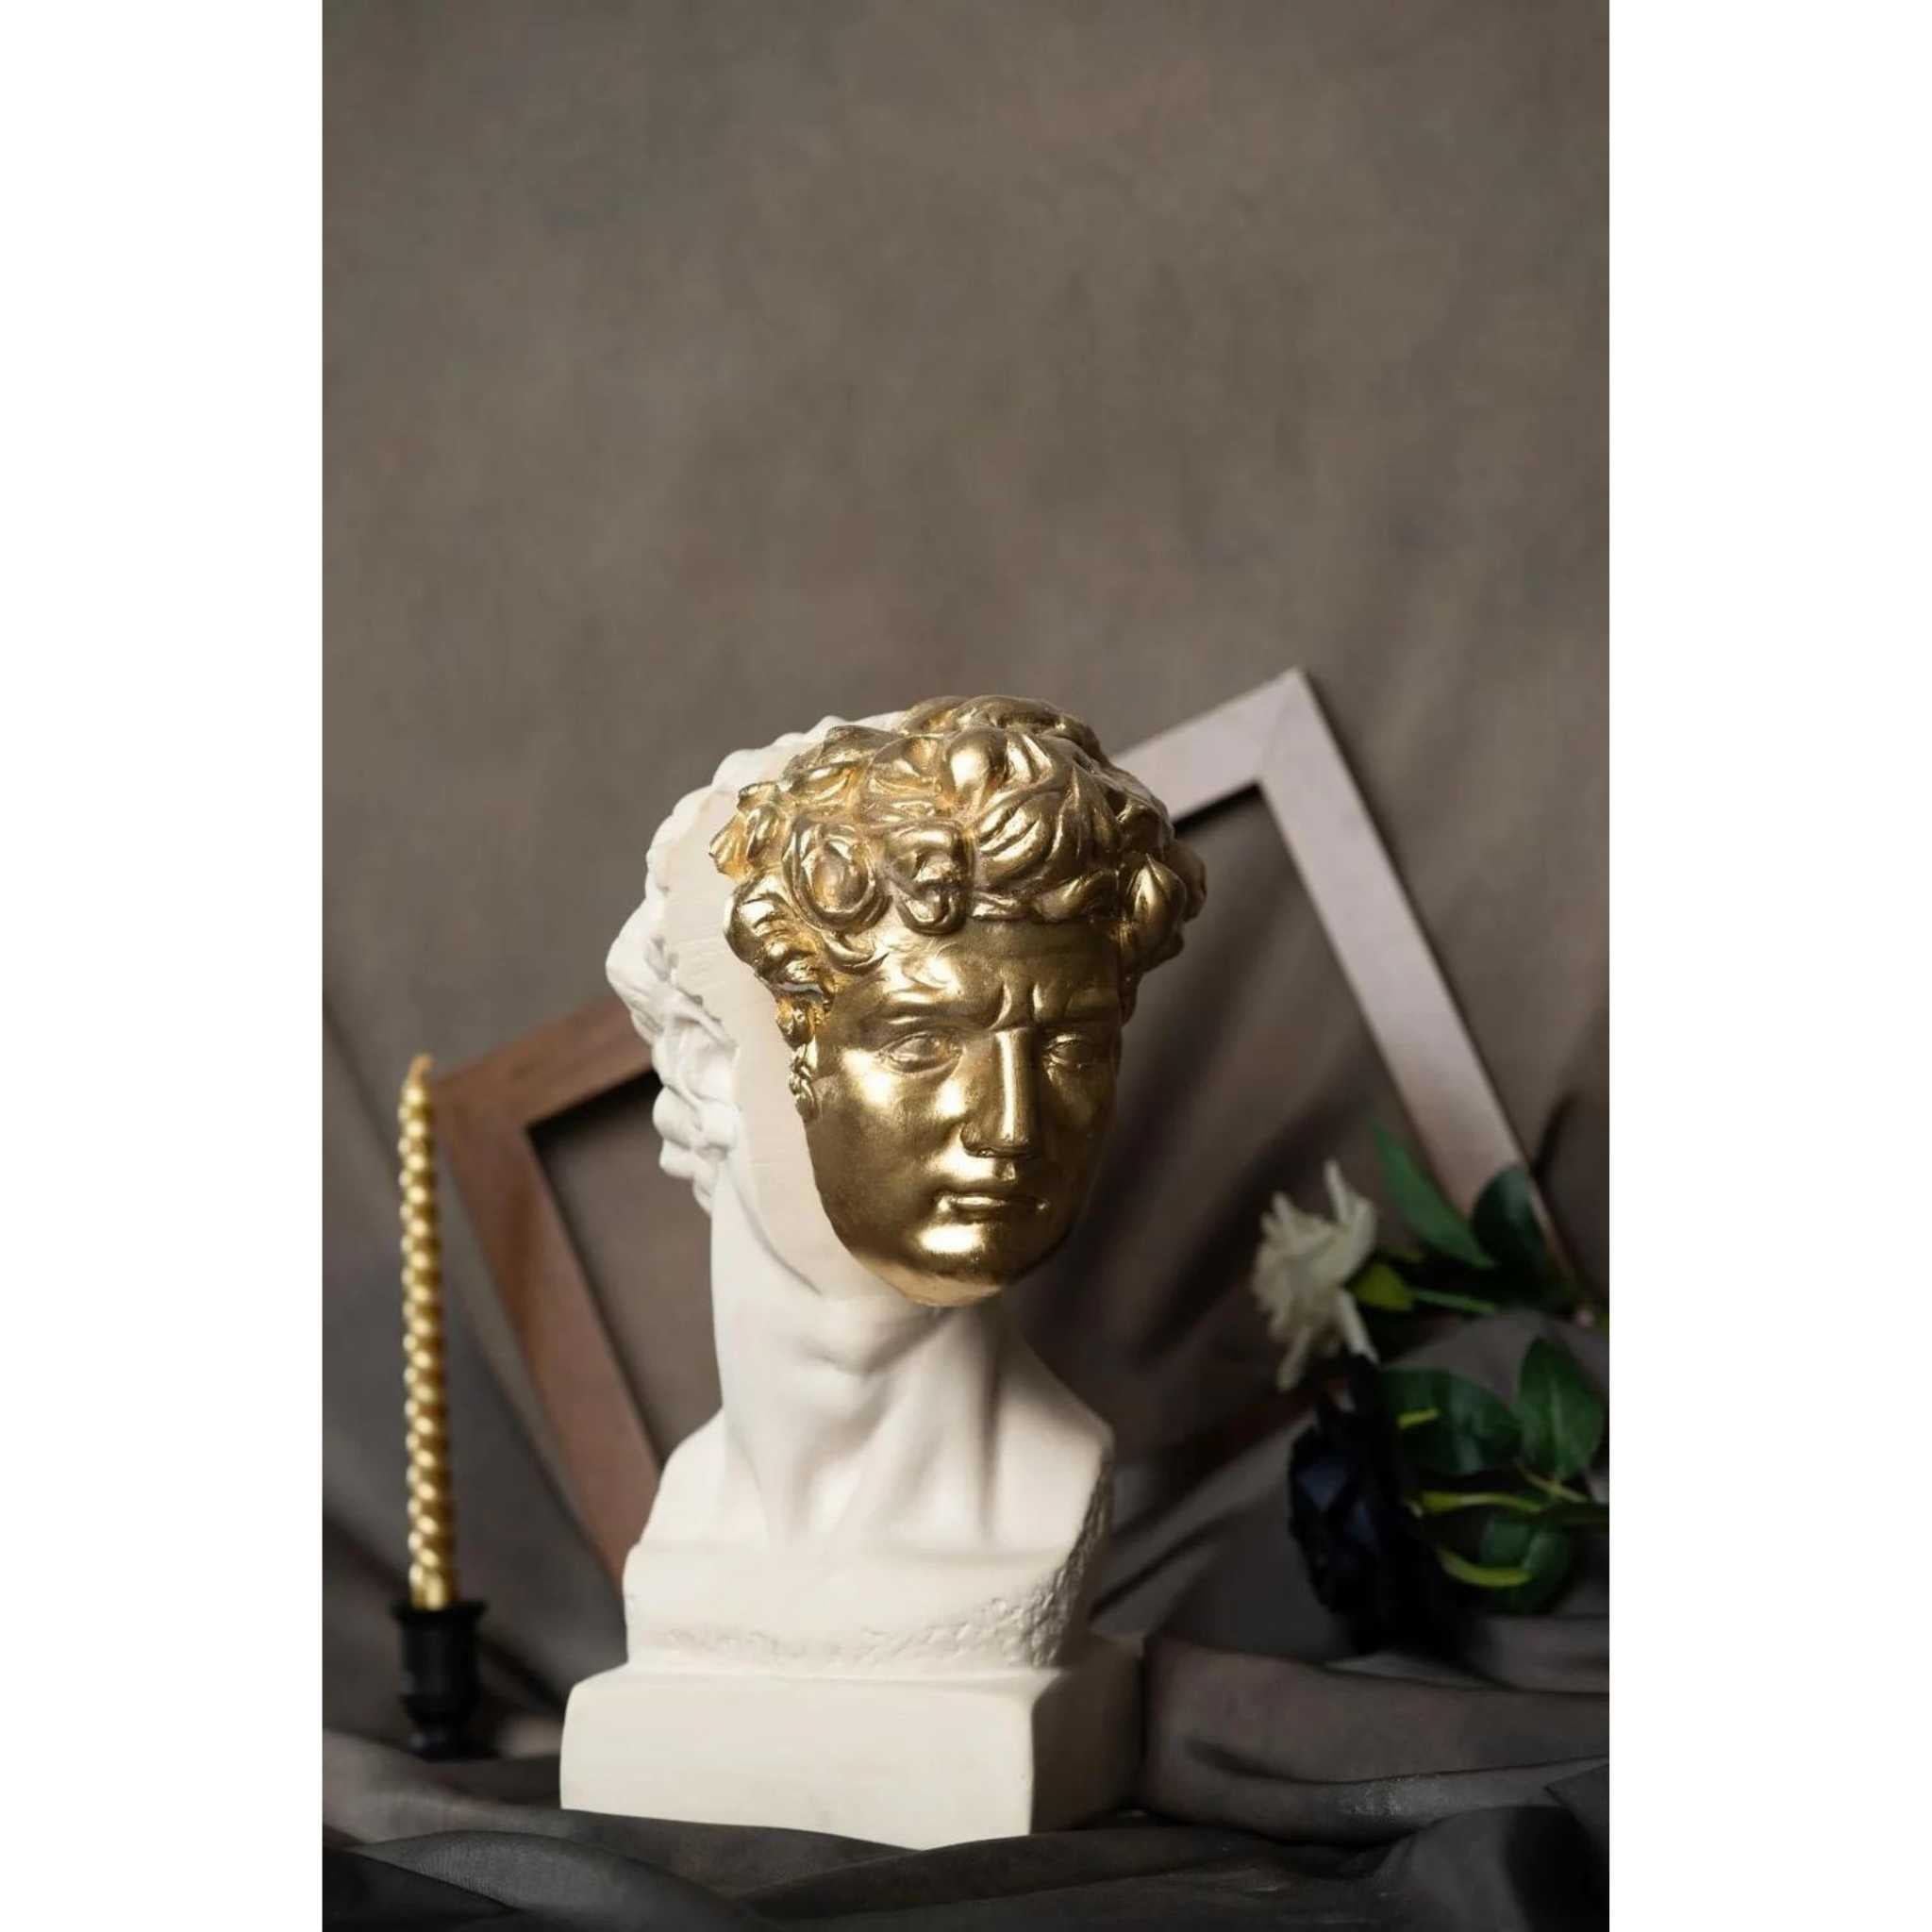 Golden Glory: The David with Mask